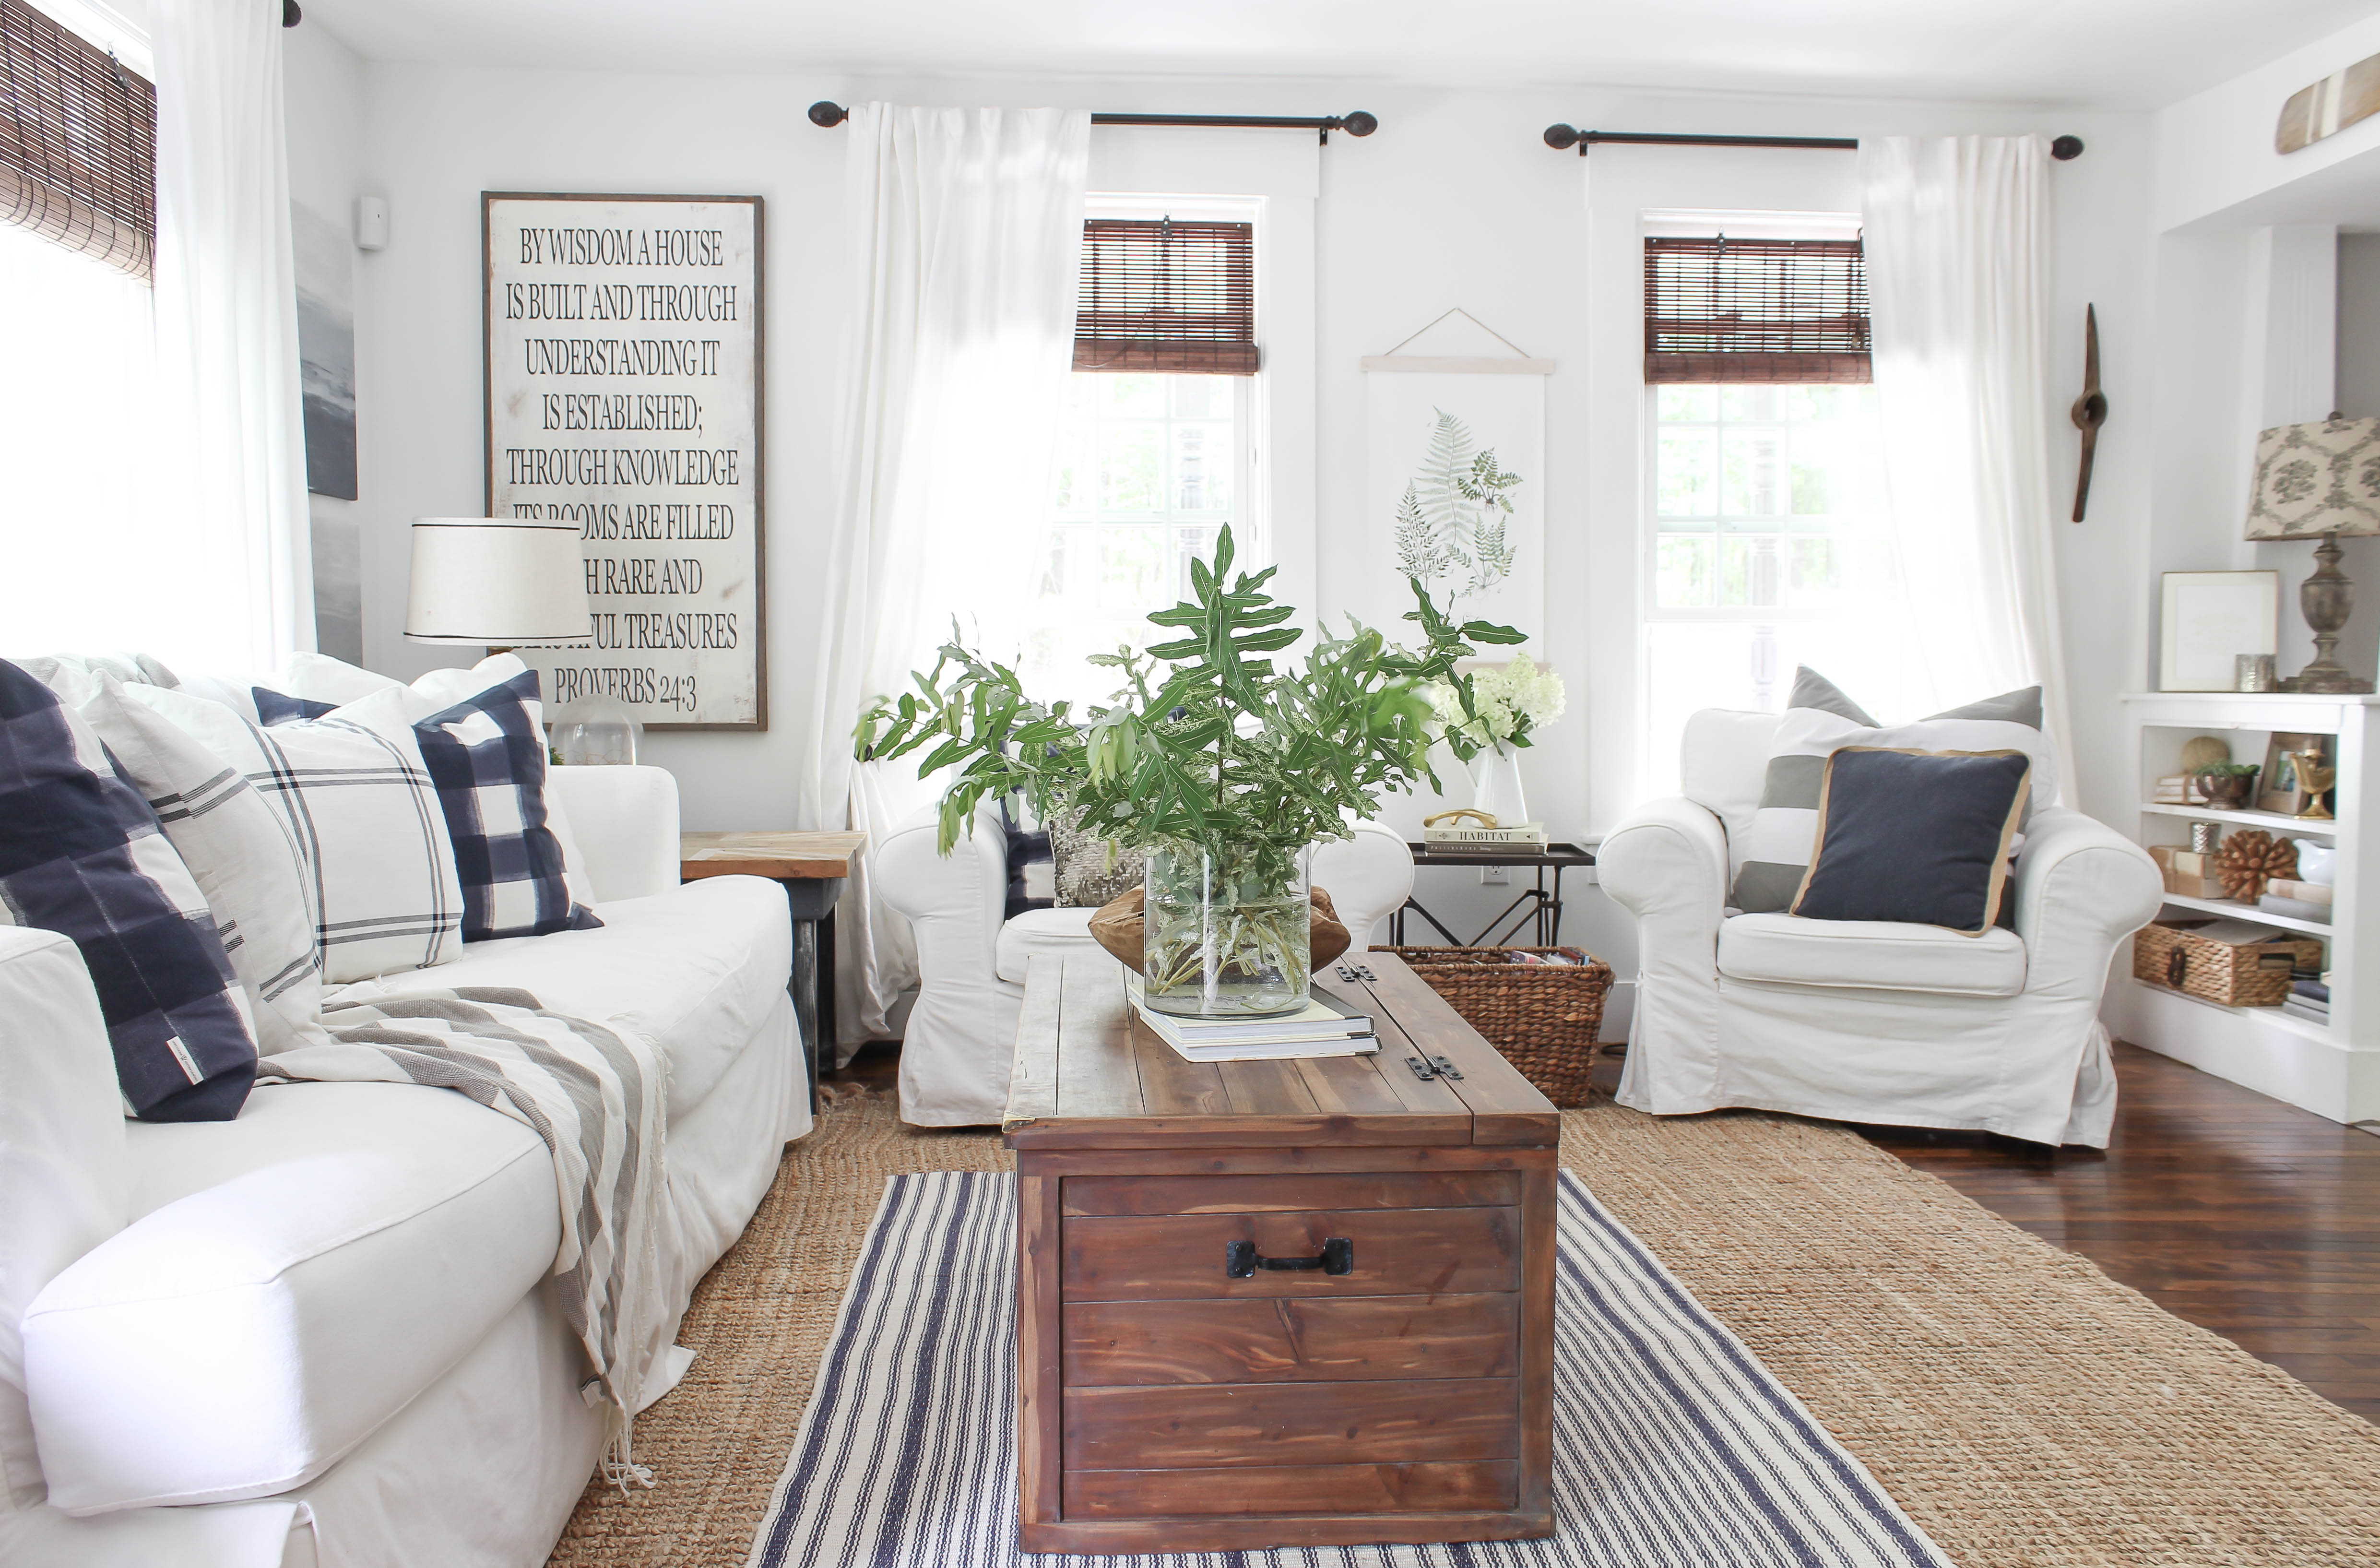 Home Tour with Wayfair - Rooms For Rent blog